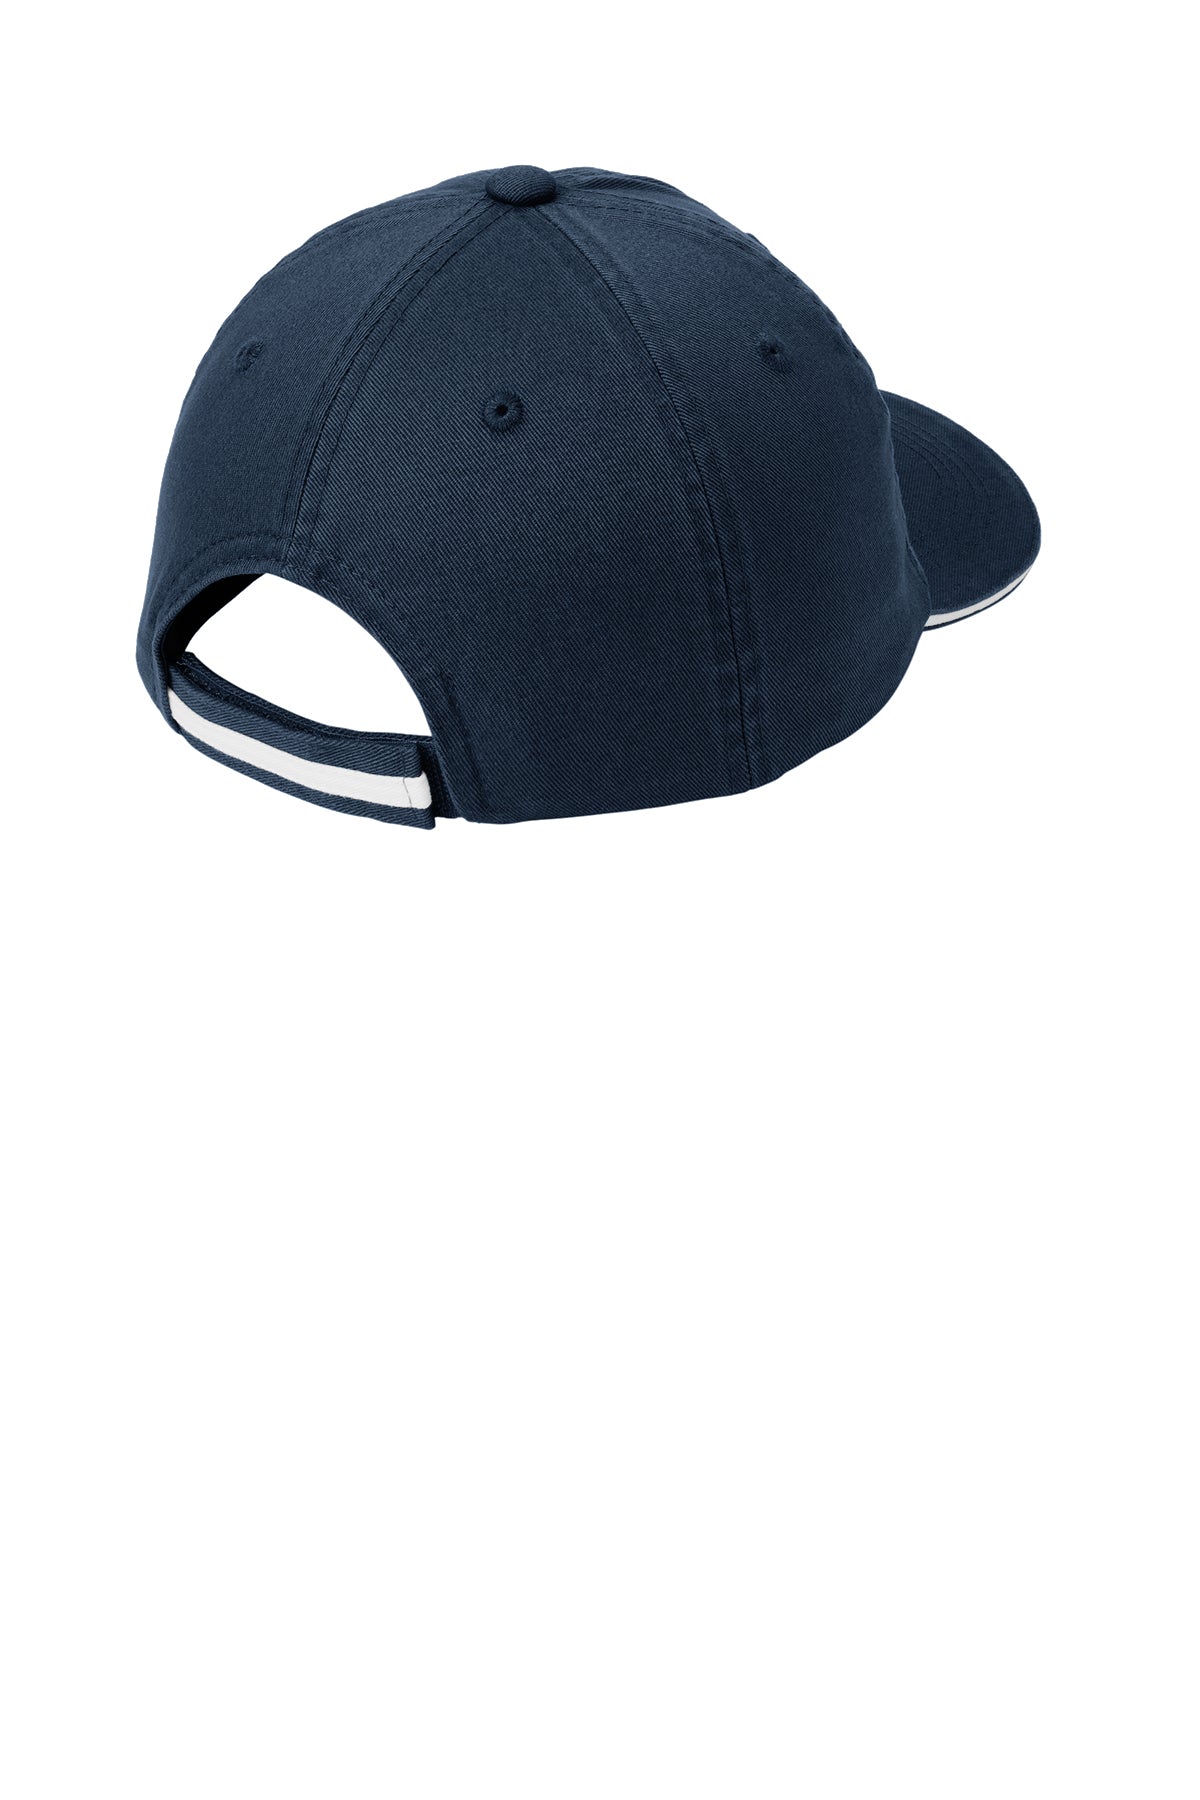 Port Authority Sandwich Bill Custom Caps with Striped Closure, Classic Navy/ White